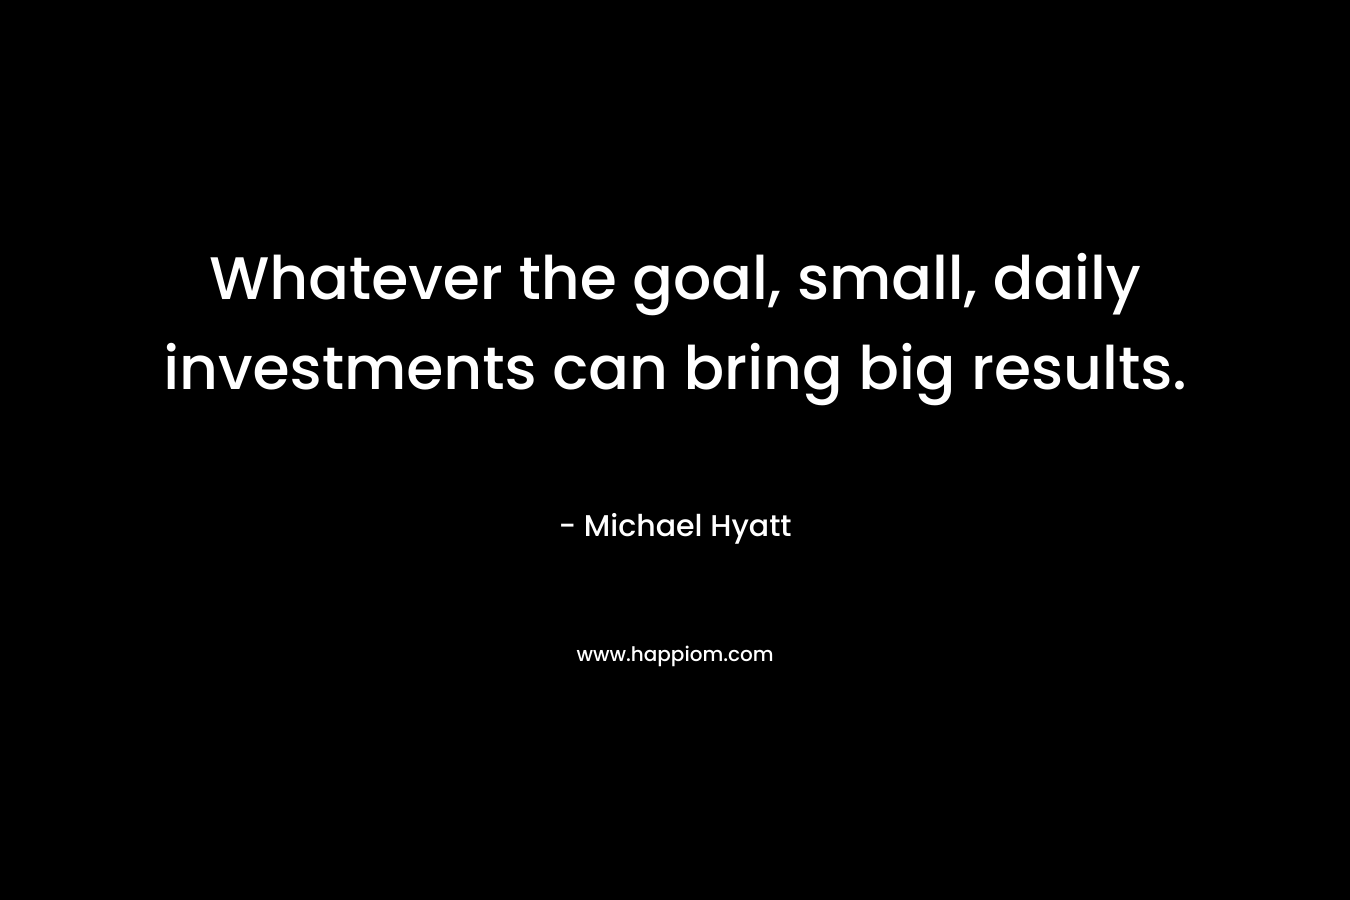 Whatever the goal, small, daily investments can bring big results. – Michael Hyatt